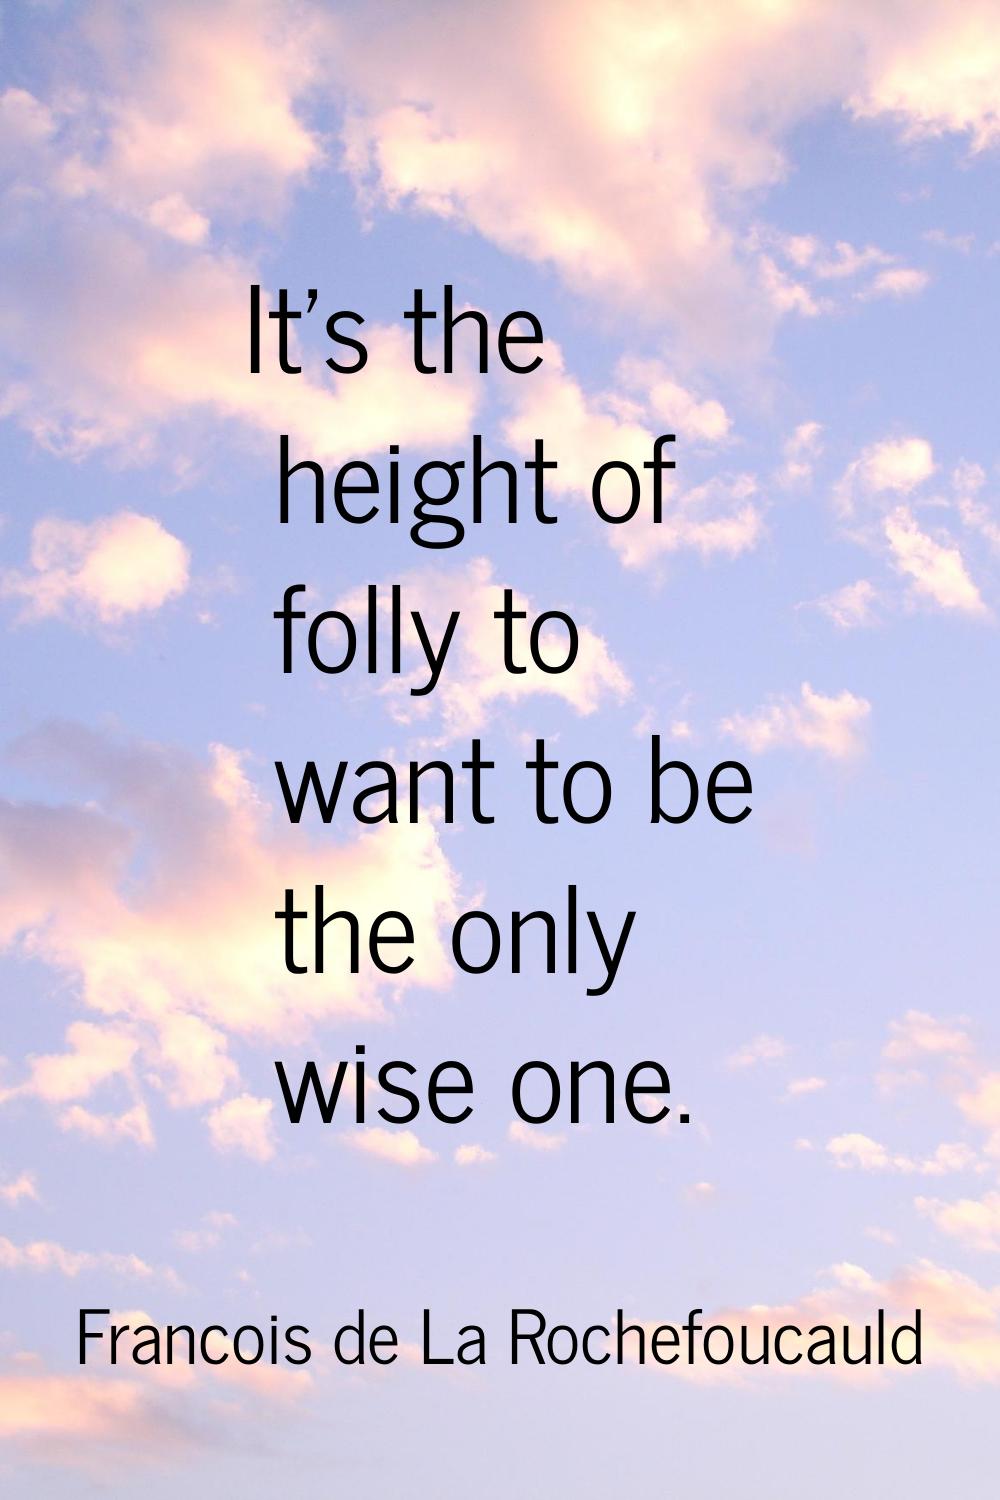 It's the height of folly to want to be the only wise one.